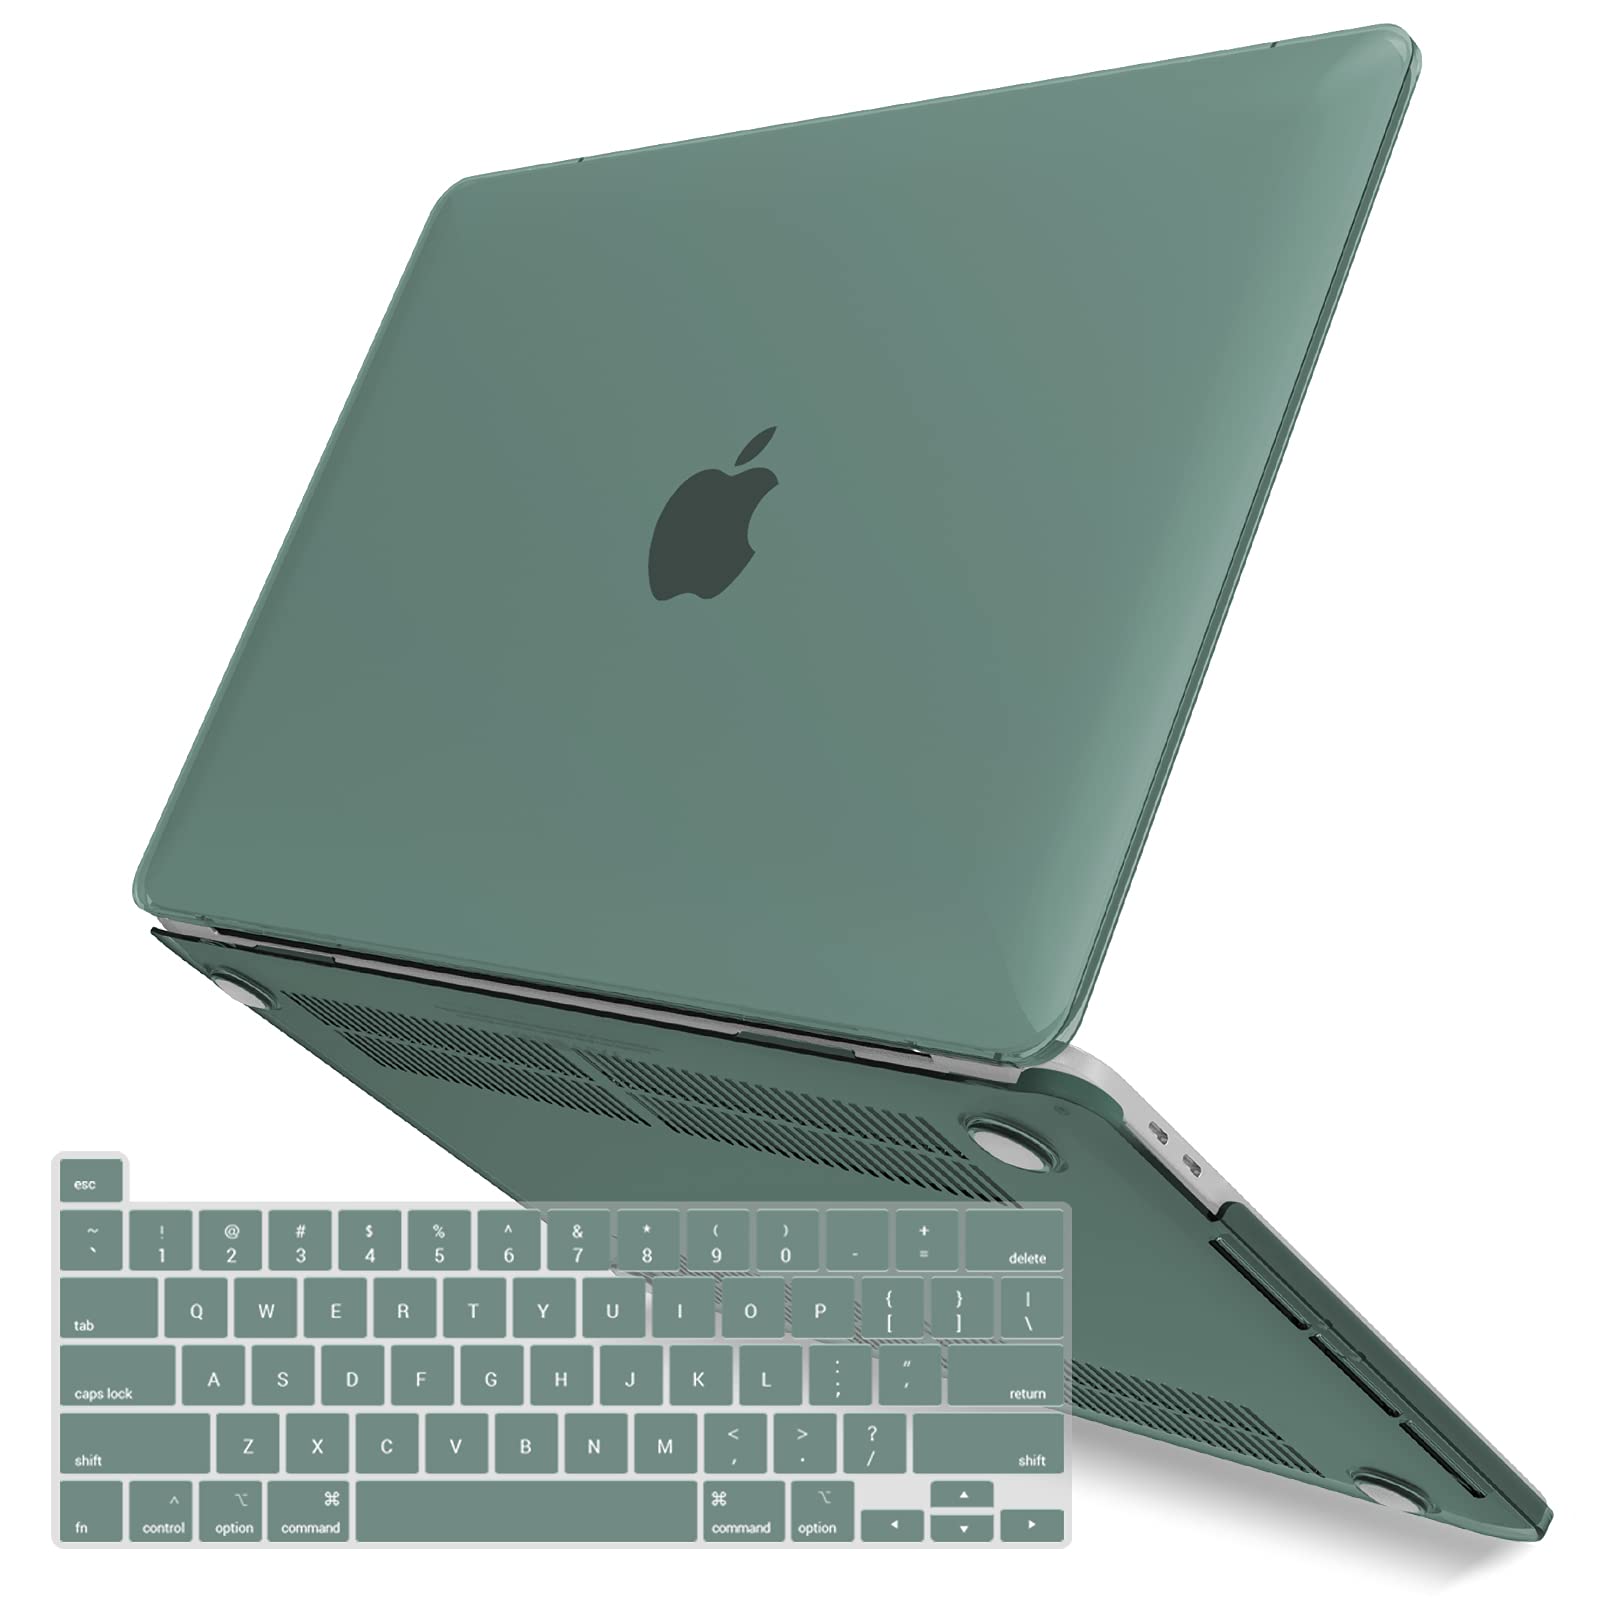 Suitable for  Midnight Green MacBook Pro 13 Inch Case 2016-2023 M1 M2 A2338 A2289 A2251 A2159 Hard Shell Case Keyboard Cover